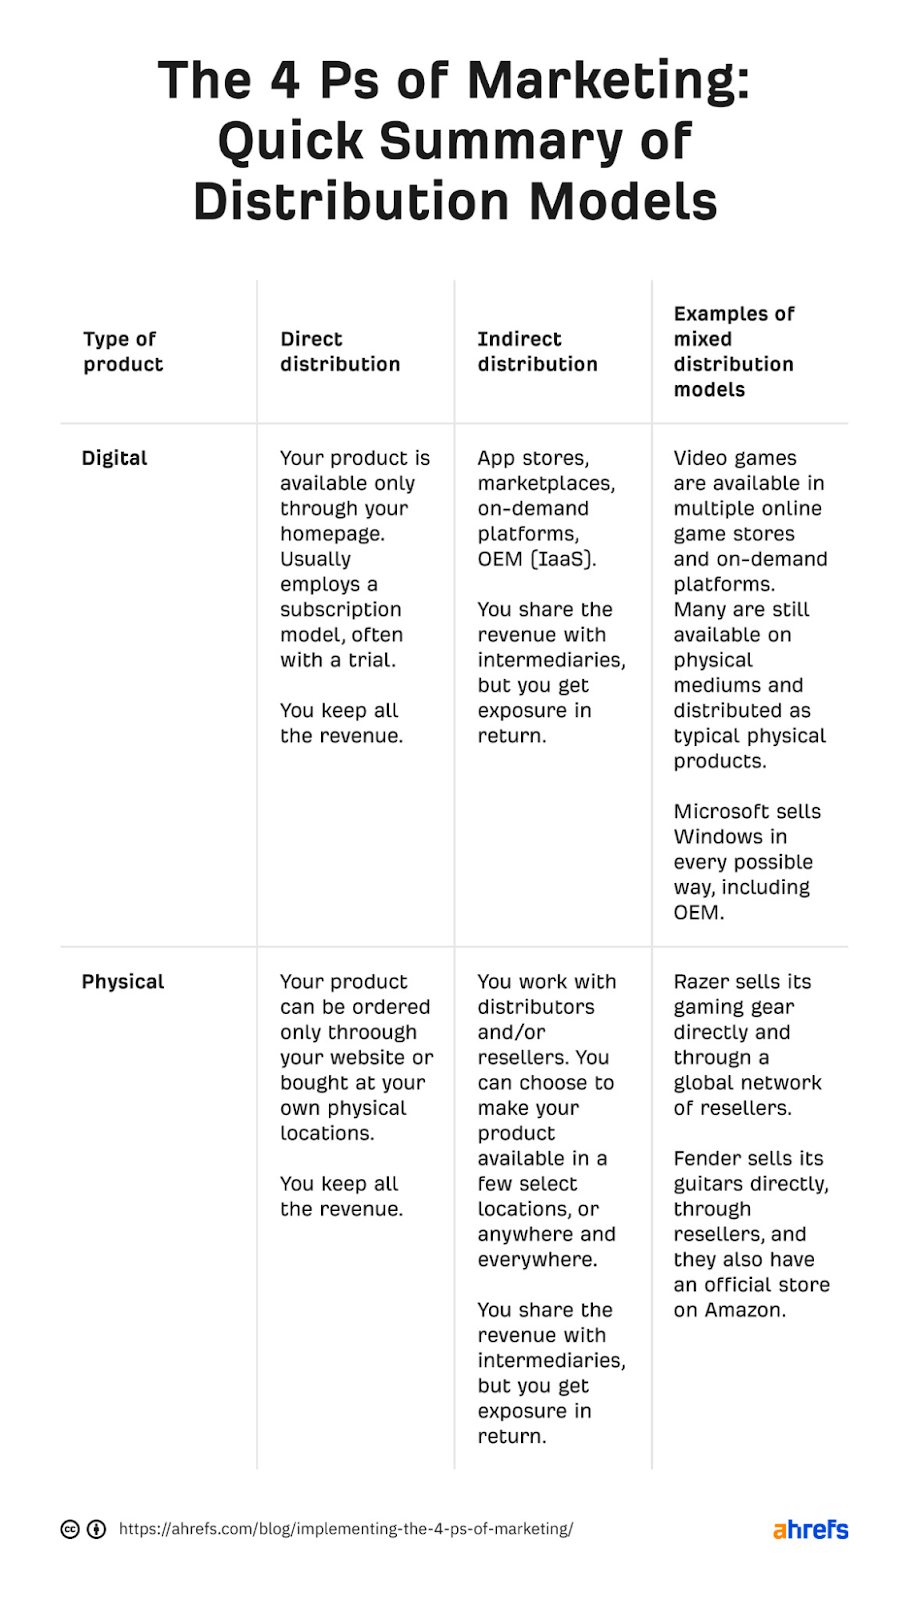 4 Ps of marketing: summary of distribution models. Columns are 